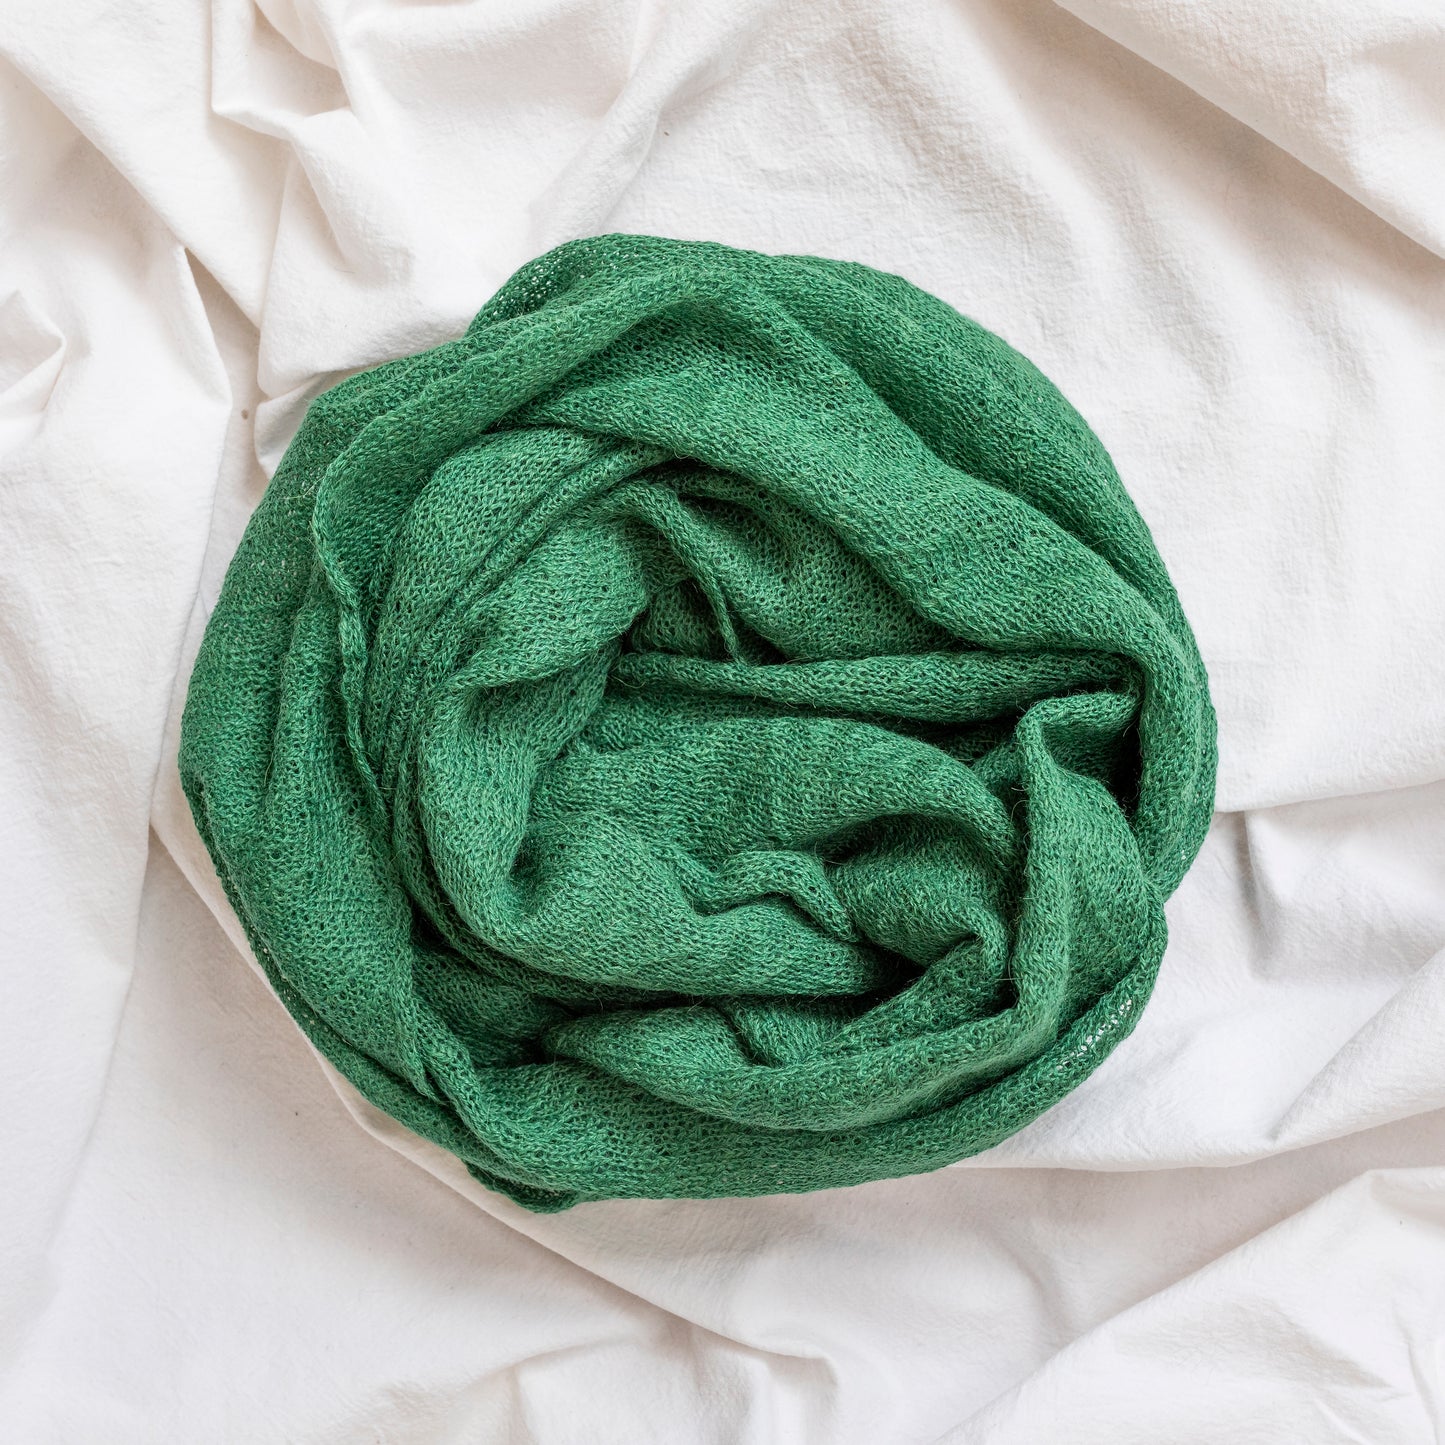 Forest green coloured lightweight and delicately woven scarf. Hand-made by artisans.